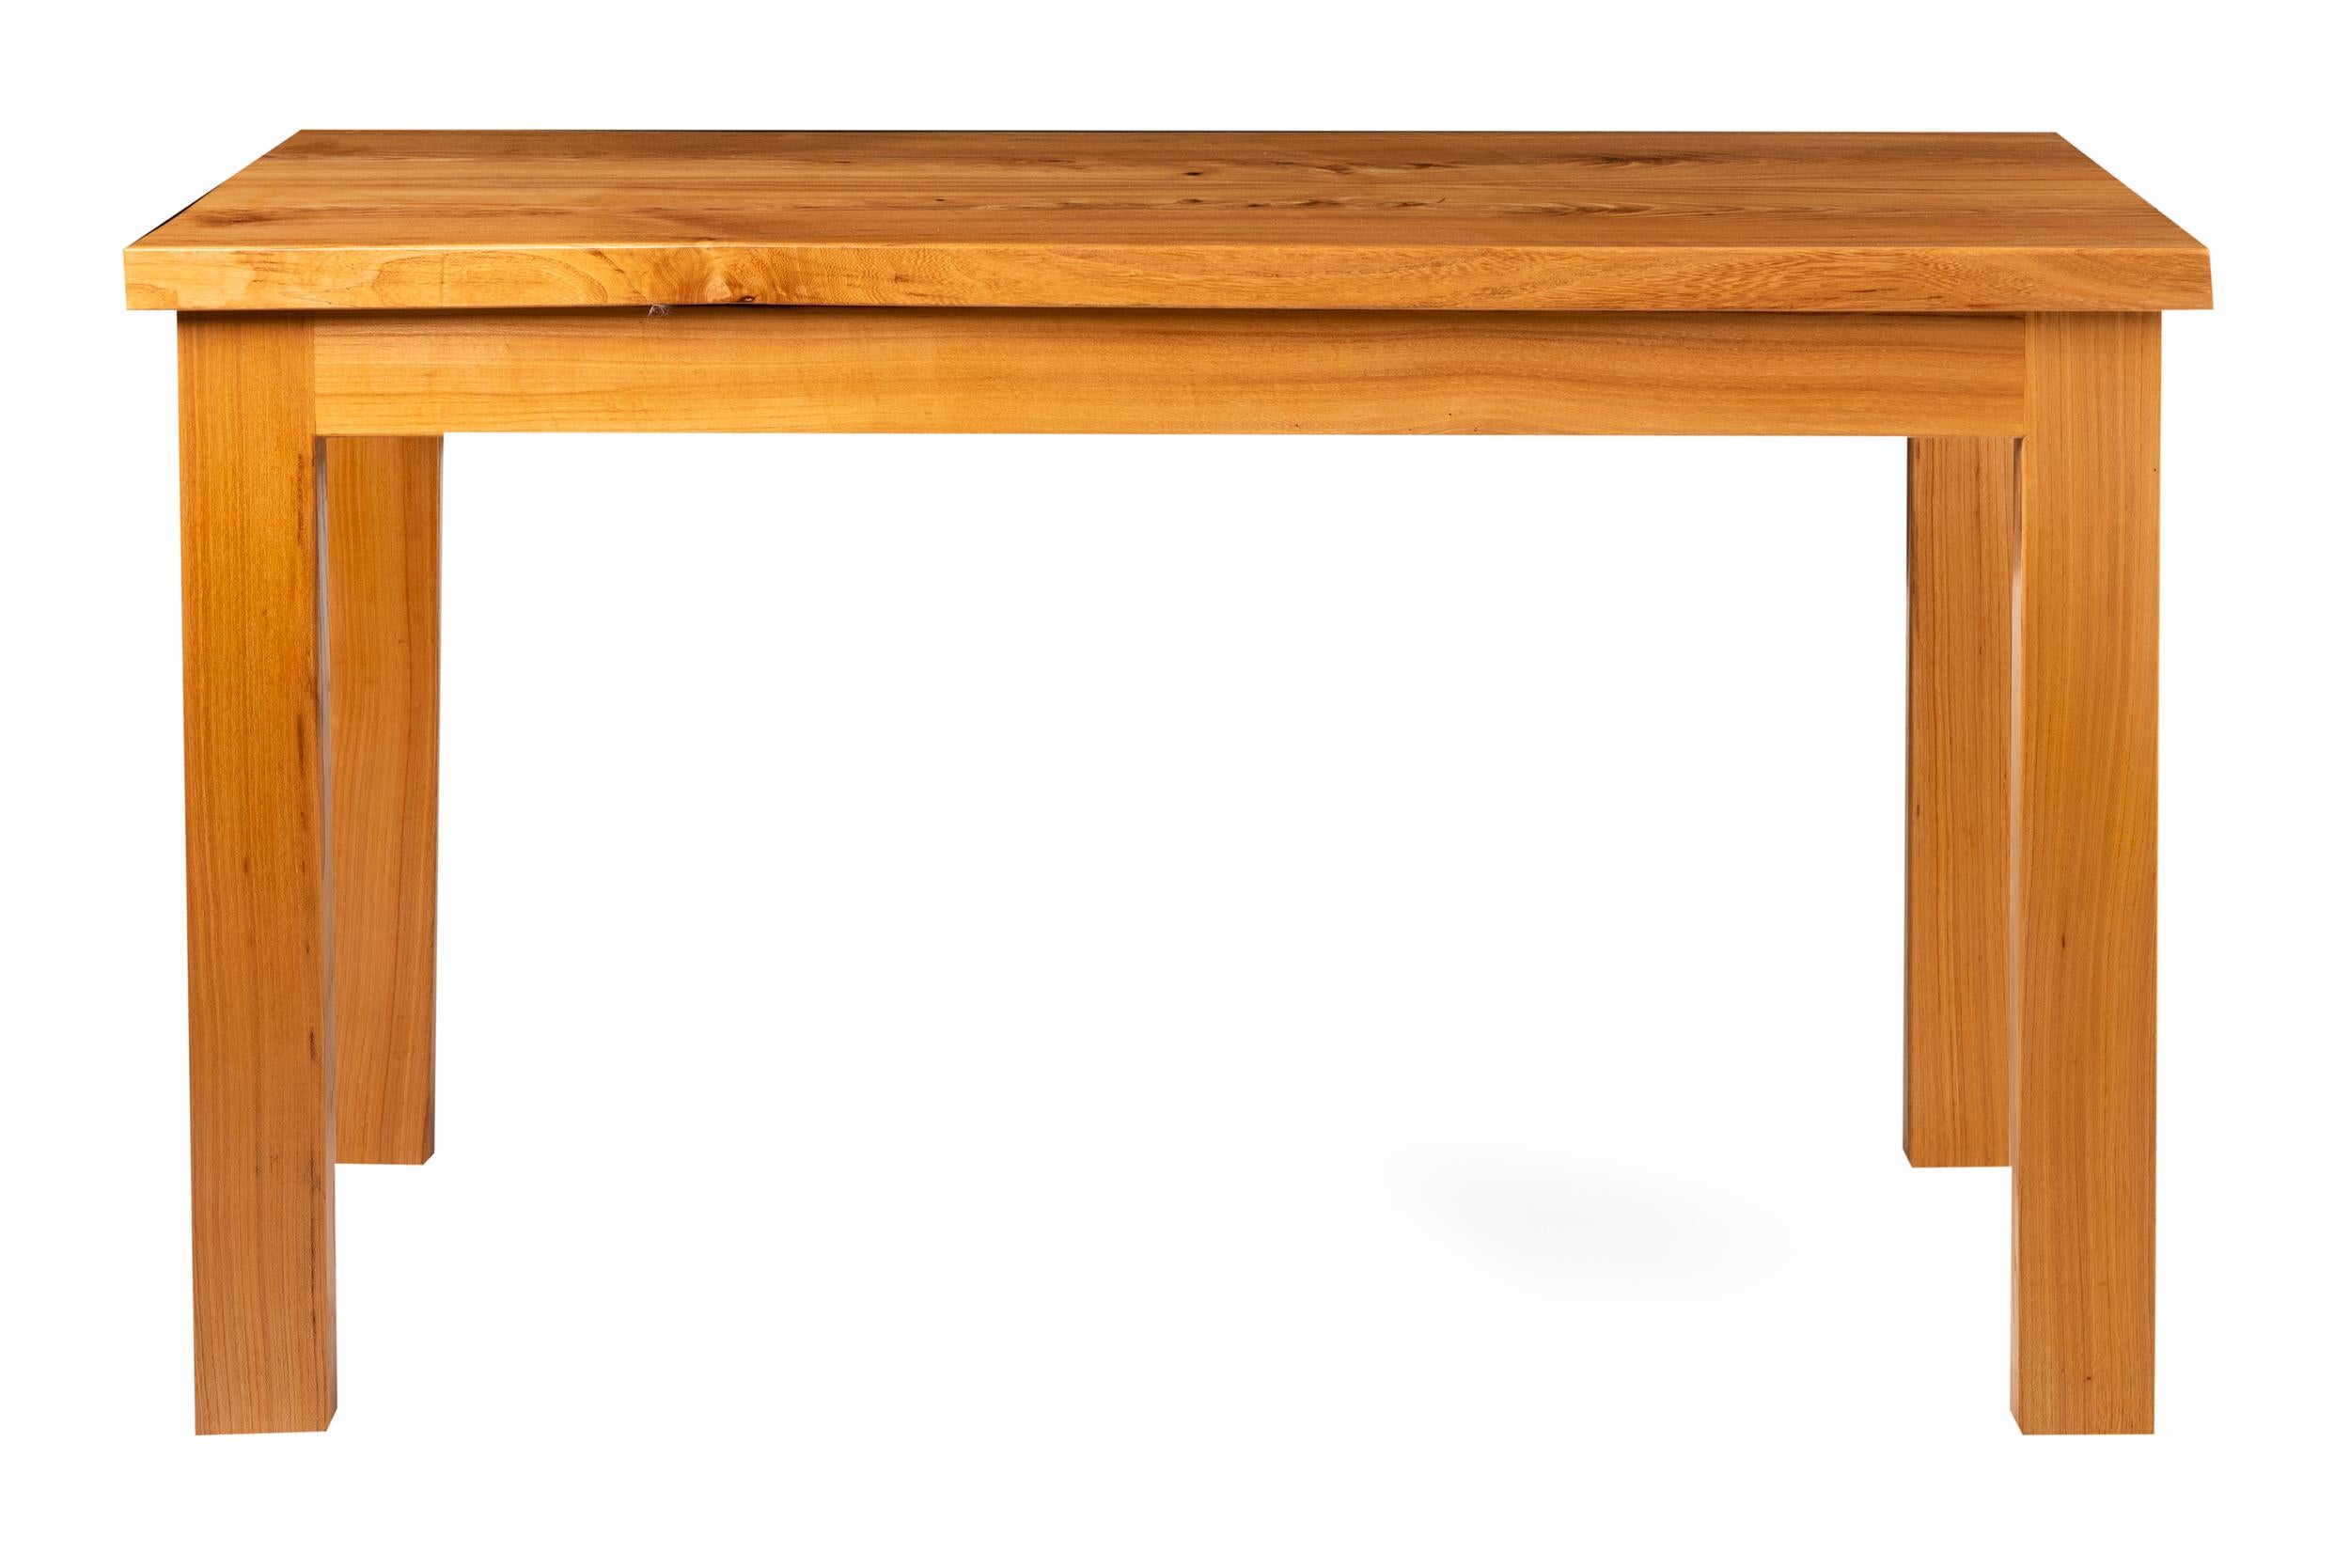 A center table by Alan Peters OBE (1933-2009)
Yew wood.
The top made from 2 symmetrical planks on square legs
Makers stamp and seller's label to underside,
circa 1980
Measures: 122 cm W x 62 cm D x 67 cm H.
  